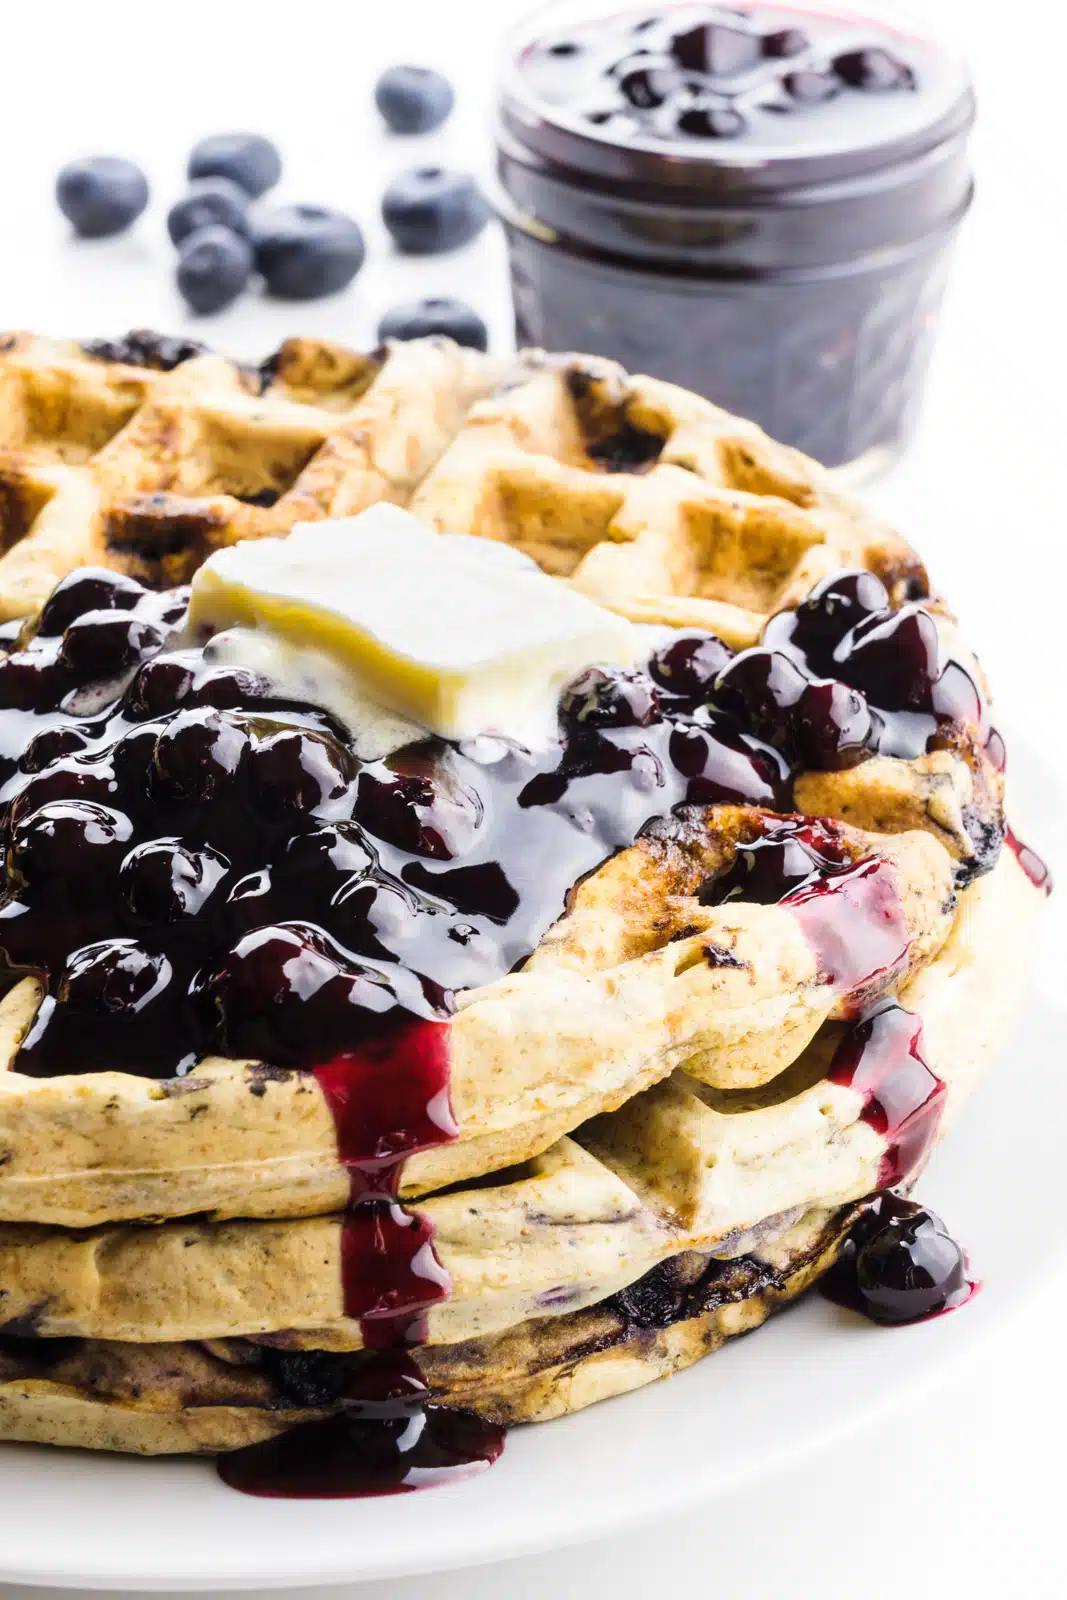 A stack of vegan blueberry waffles has vegan butter on top and some blueberry sauce. There are fresh blueberries and a bowl of more blueberry sauce behind it.